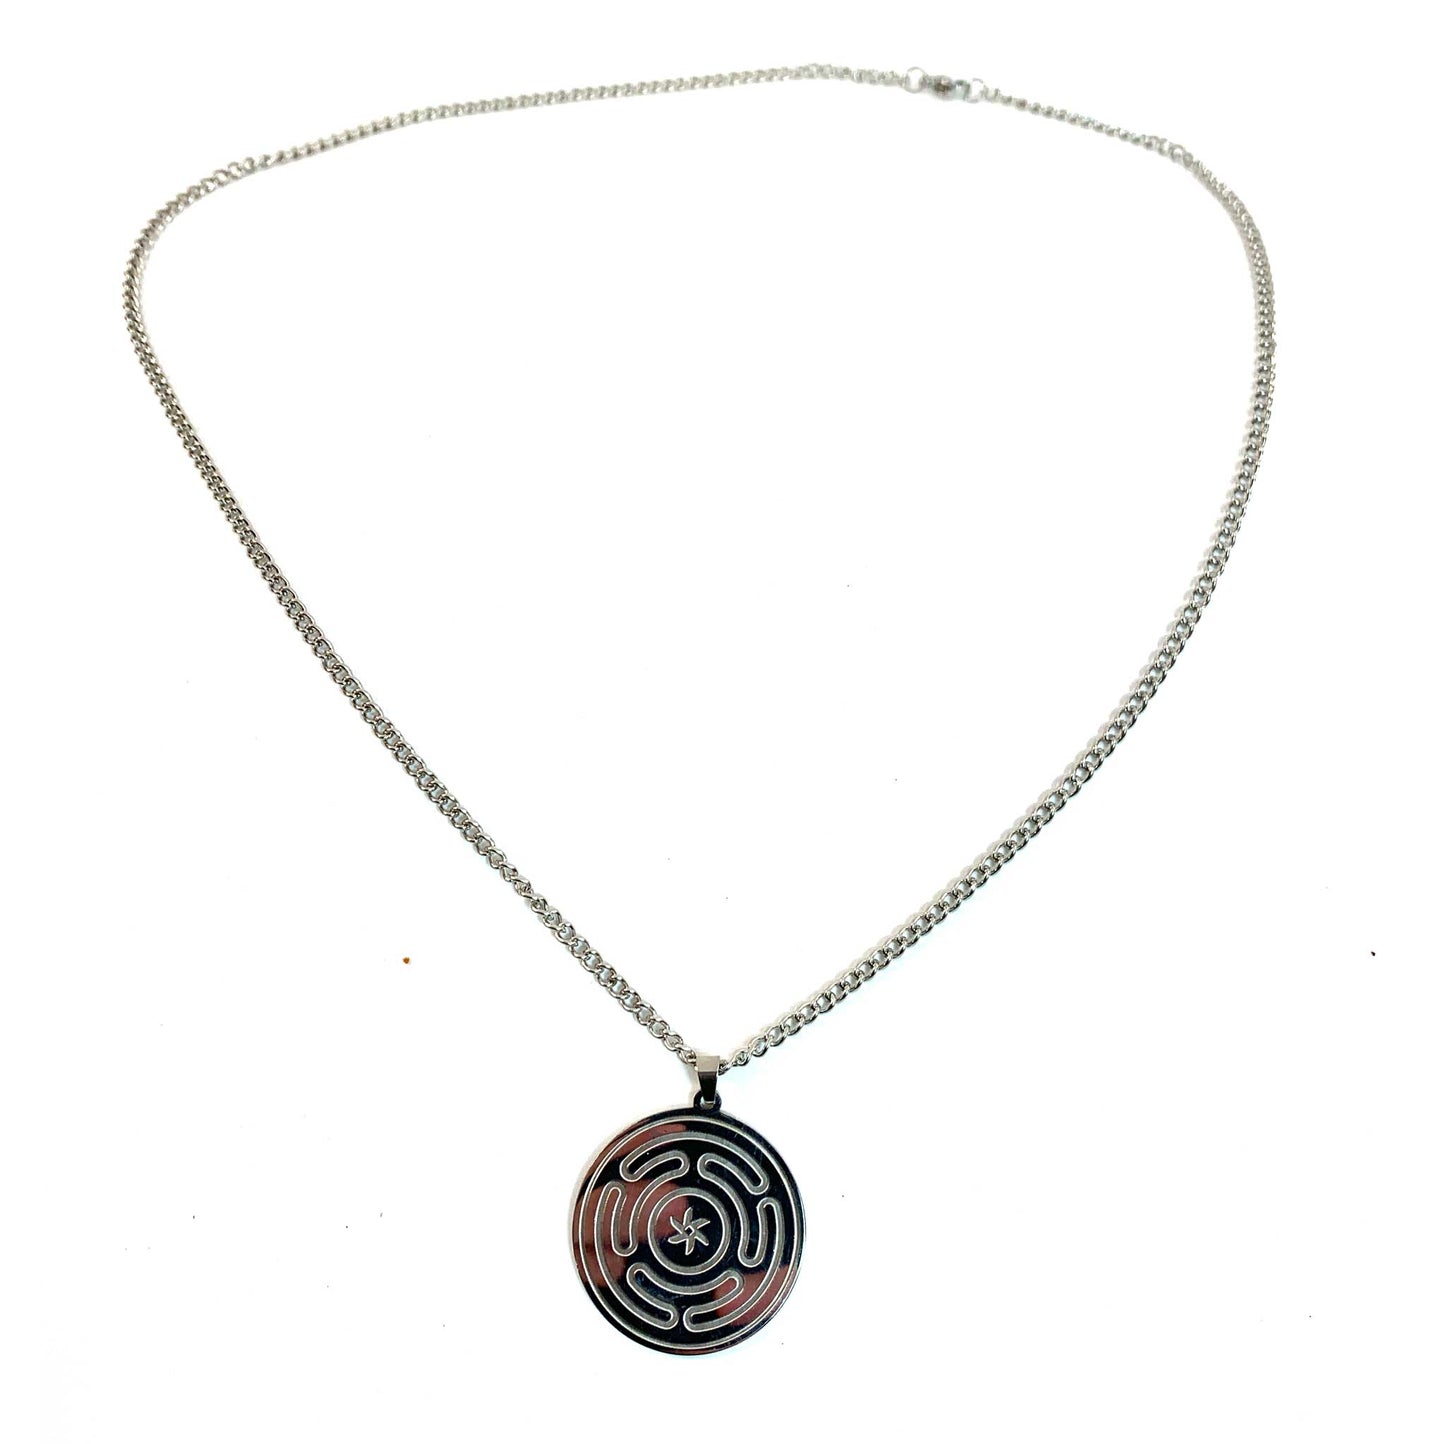 Hecate's Wheel Necklace